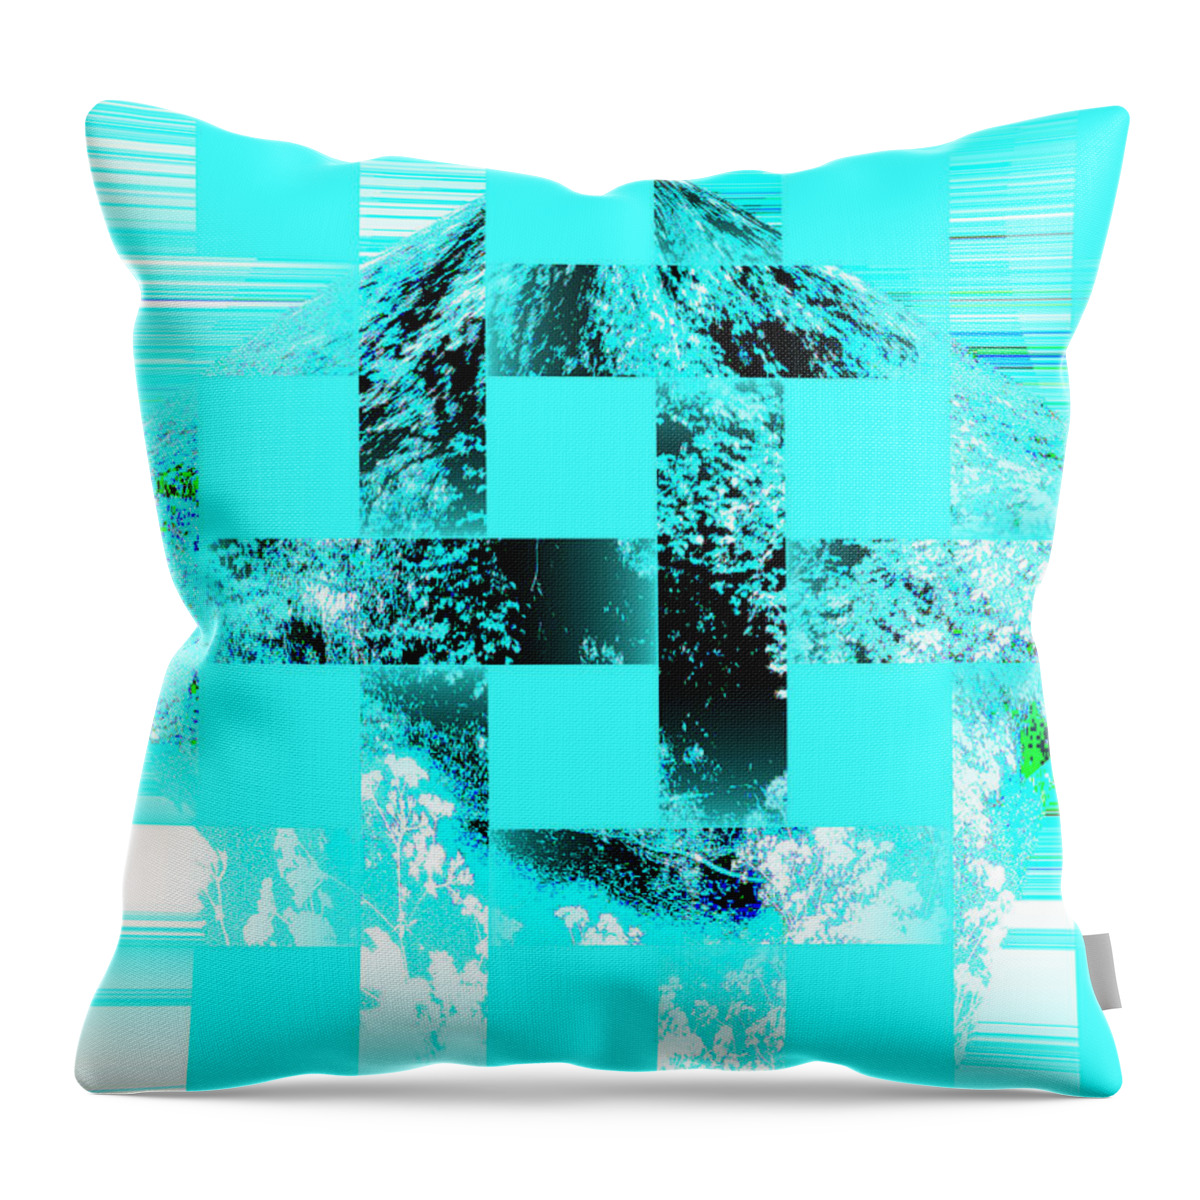 From Autumn Breaks Gallery Throw Pillow featuring the photograph Elements 88 by The Lovelock experience